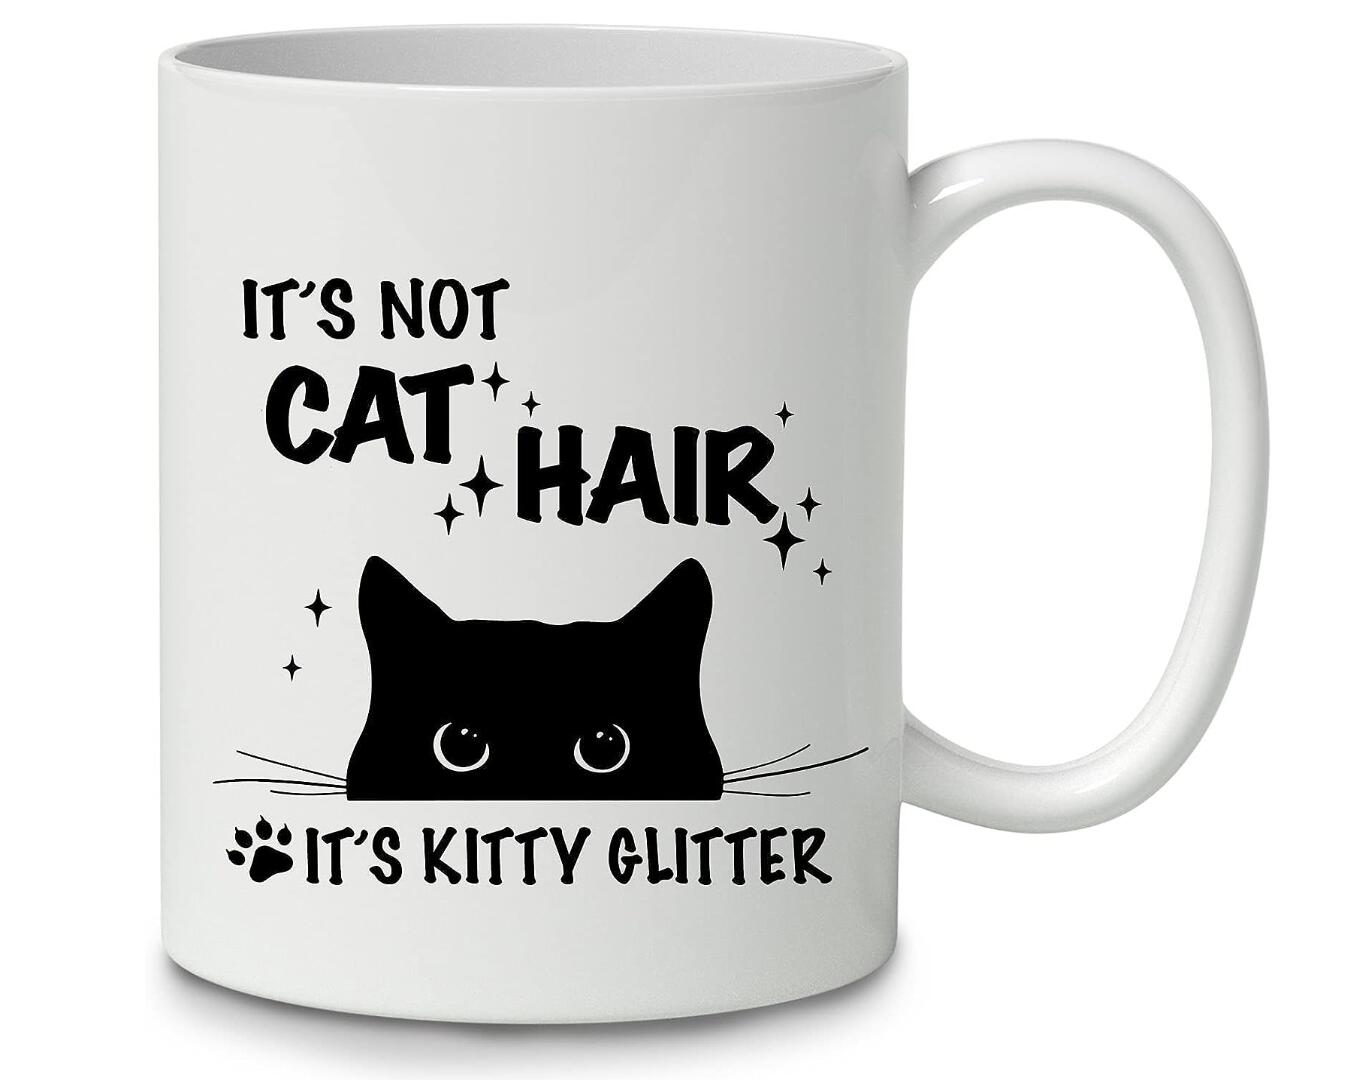 It's Not Cat Hair It's Kitty Glitter Coffee Mug Funny Pet Lover Gift Cup